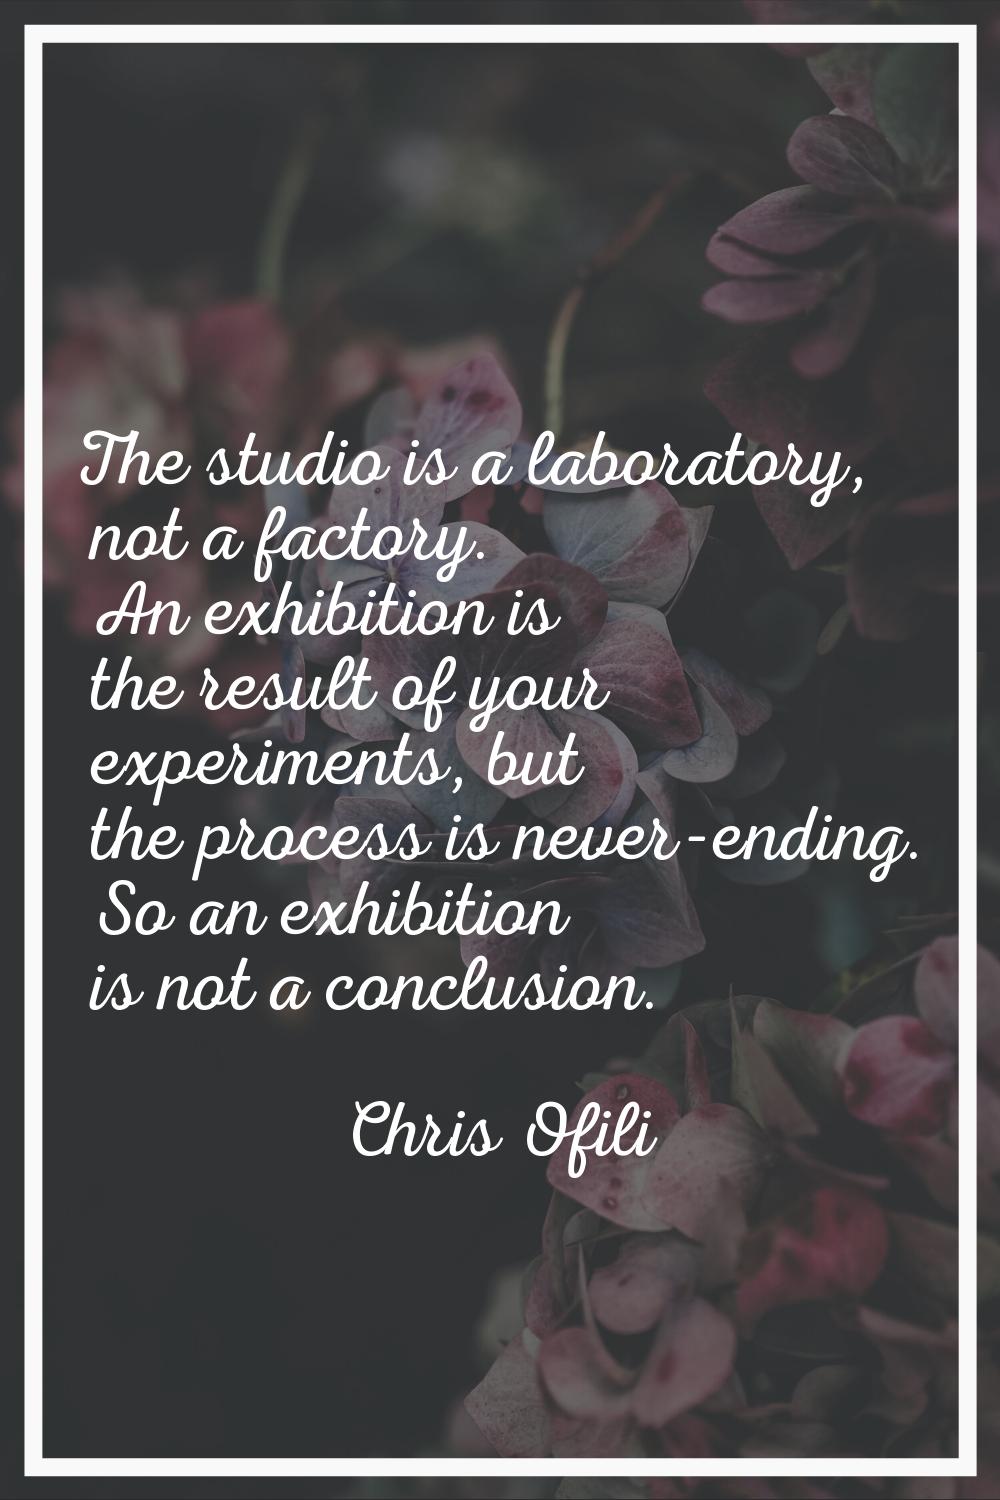 The studio is a laboratory, not a factory. An exhibition is the result of your experiments, but the